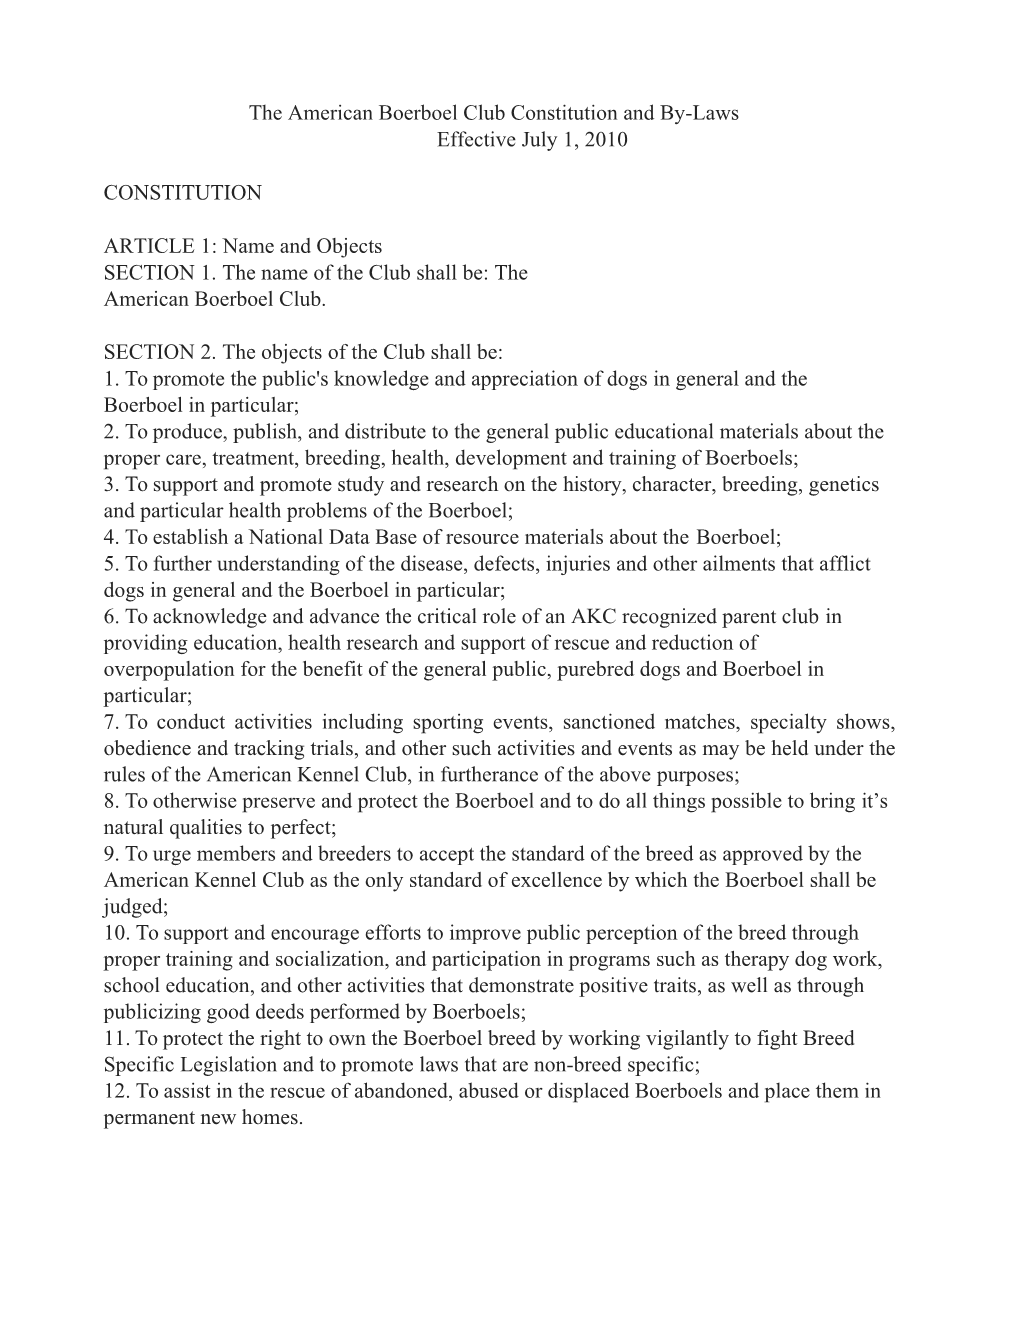 ABC Constitution and By-Laws